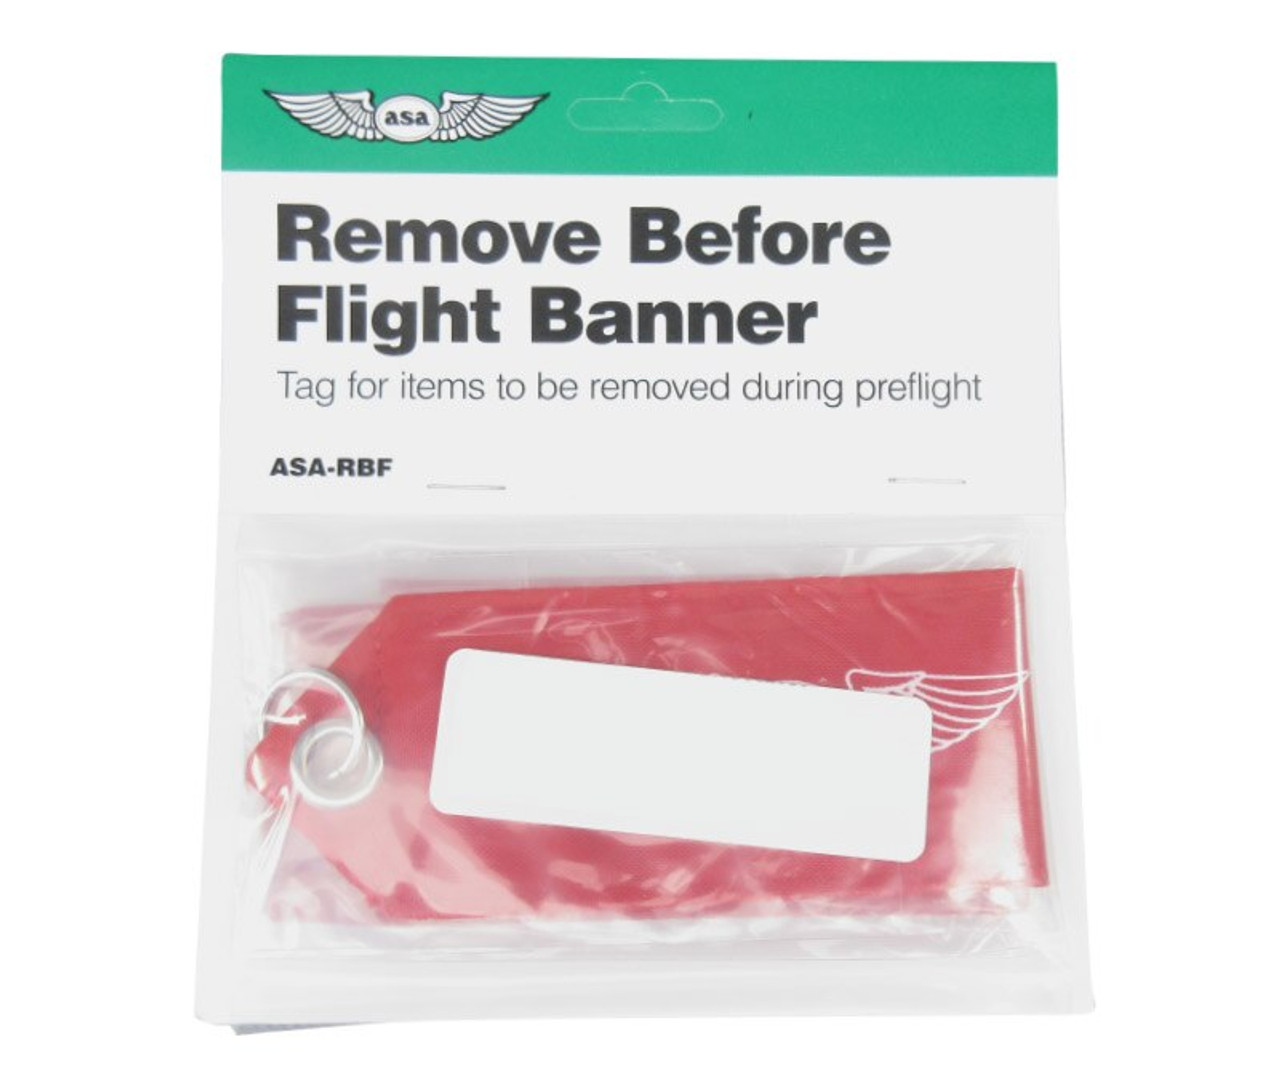 Fo your safety please remove before flight. Aviation & airplane